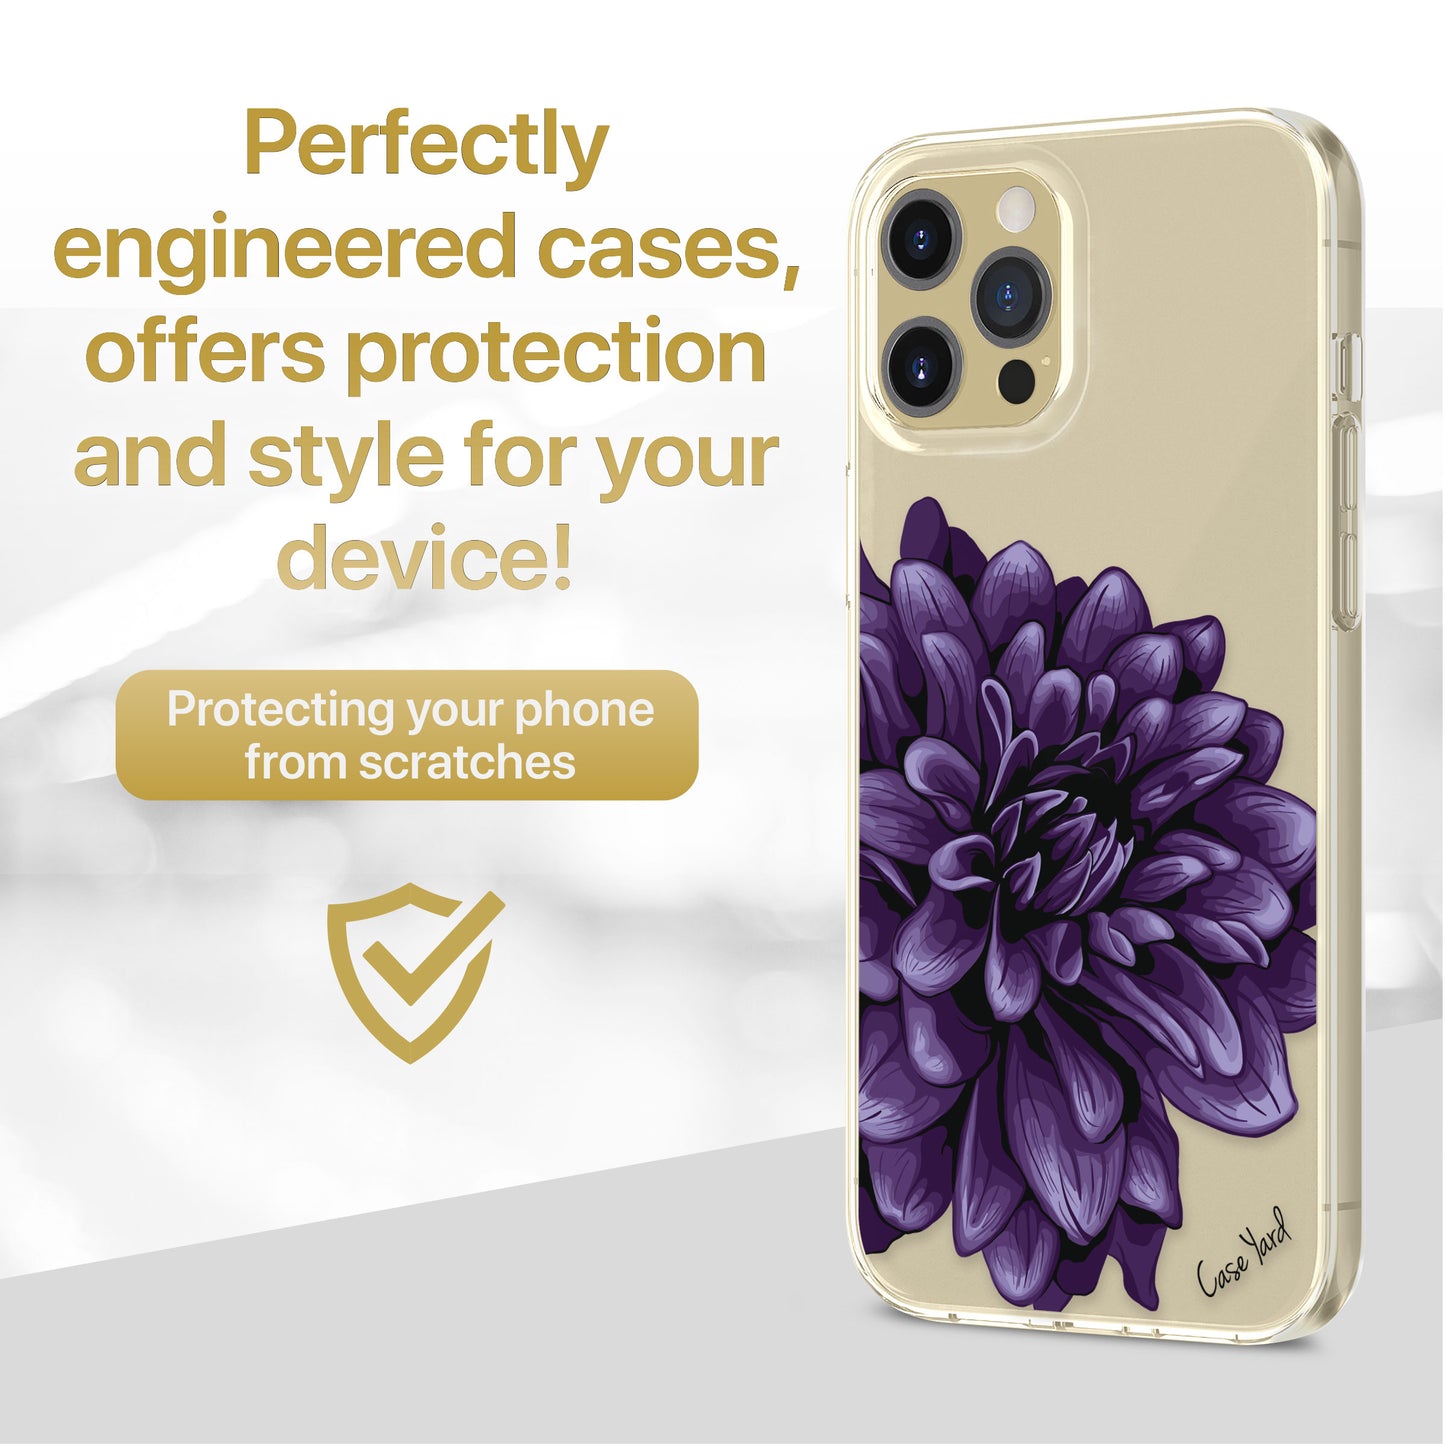 TPU Clear case with (Dahlia) Design for iPhone & Samsung Phones